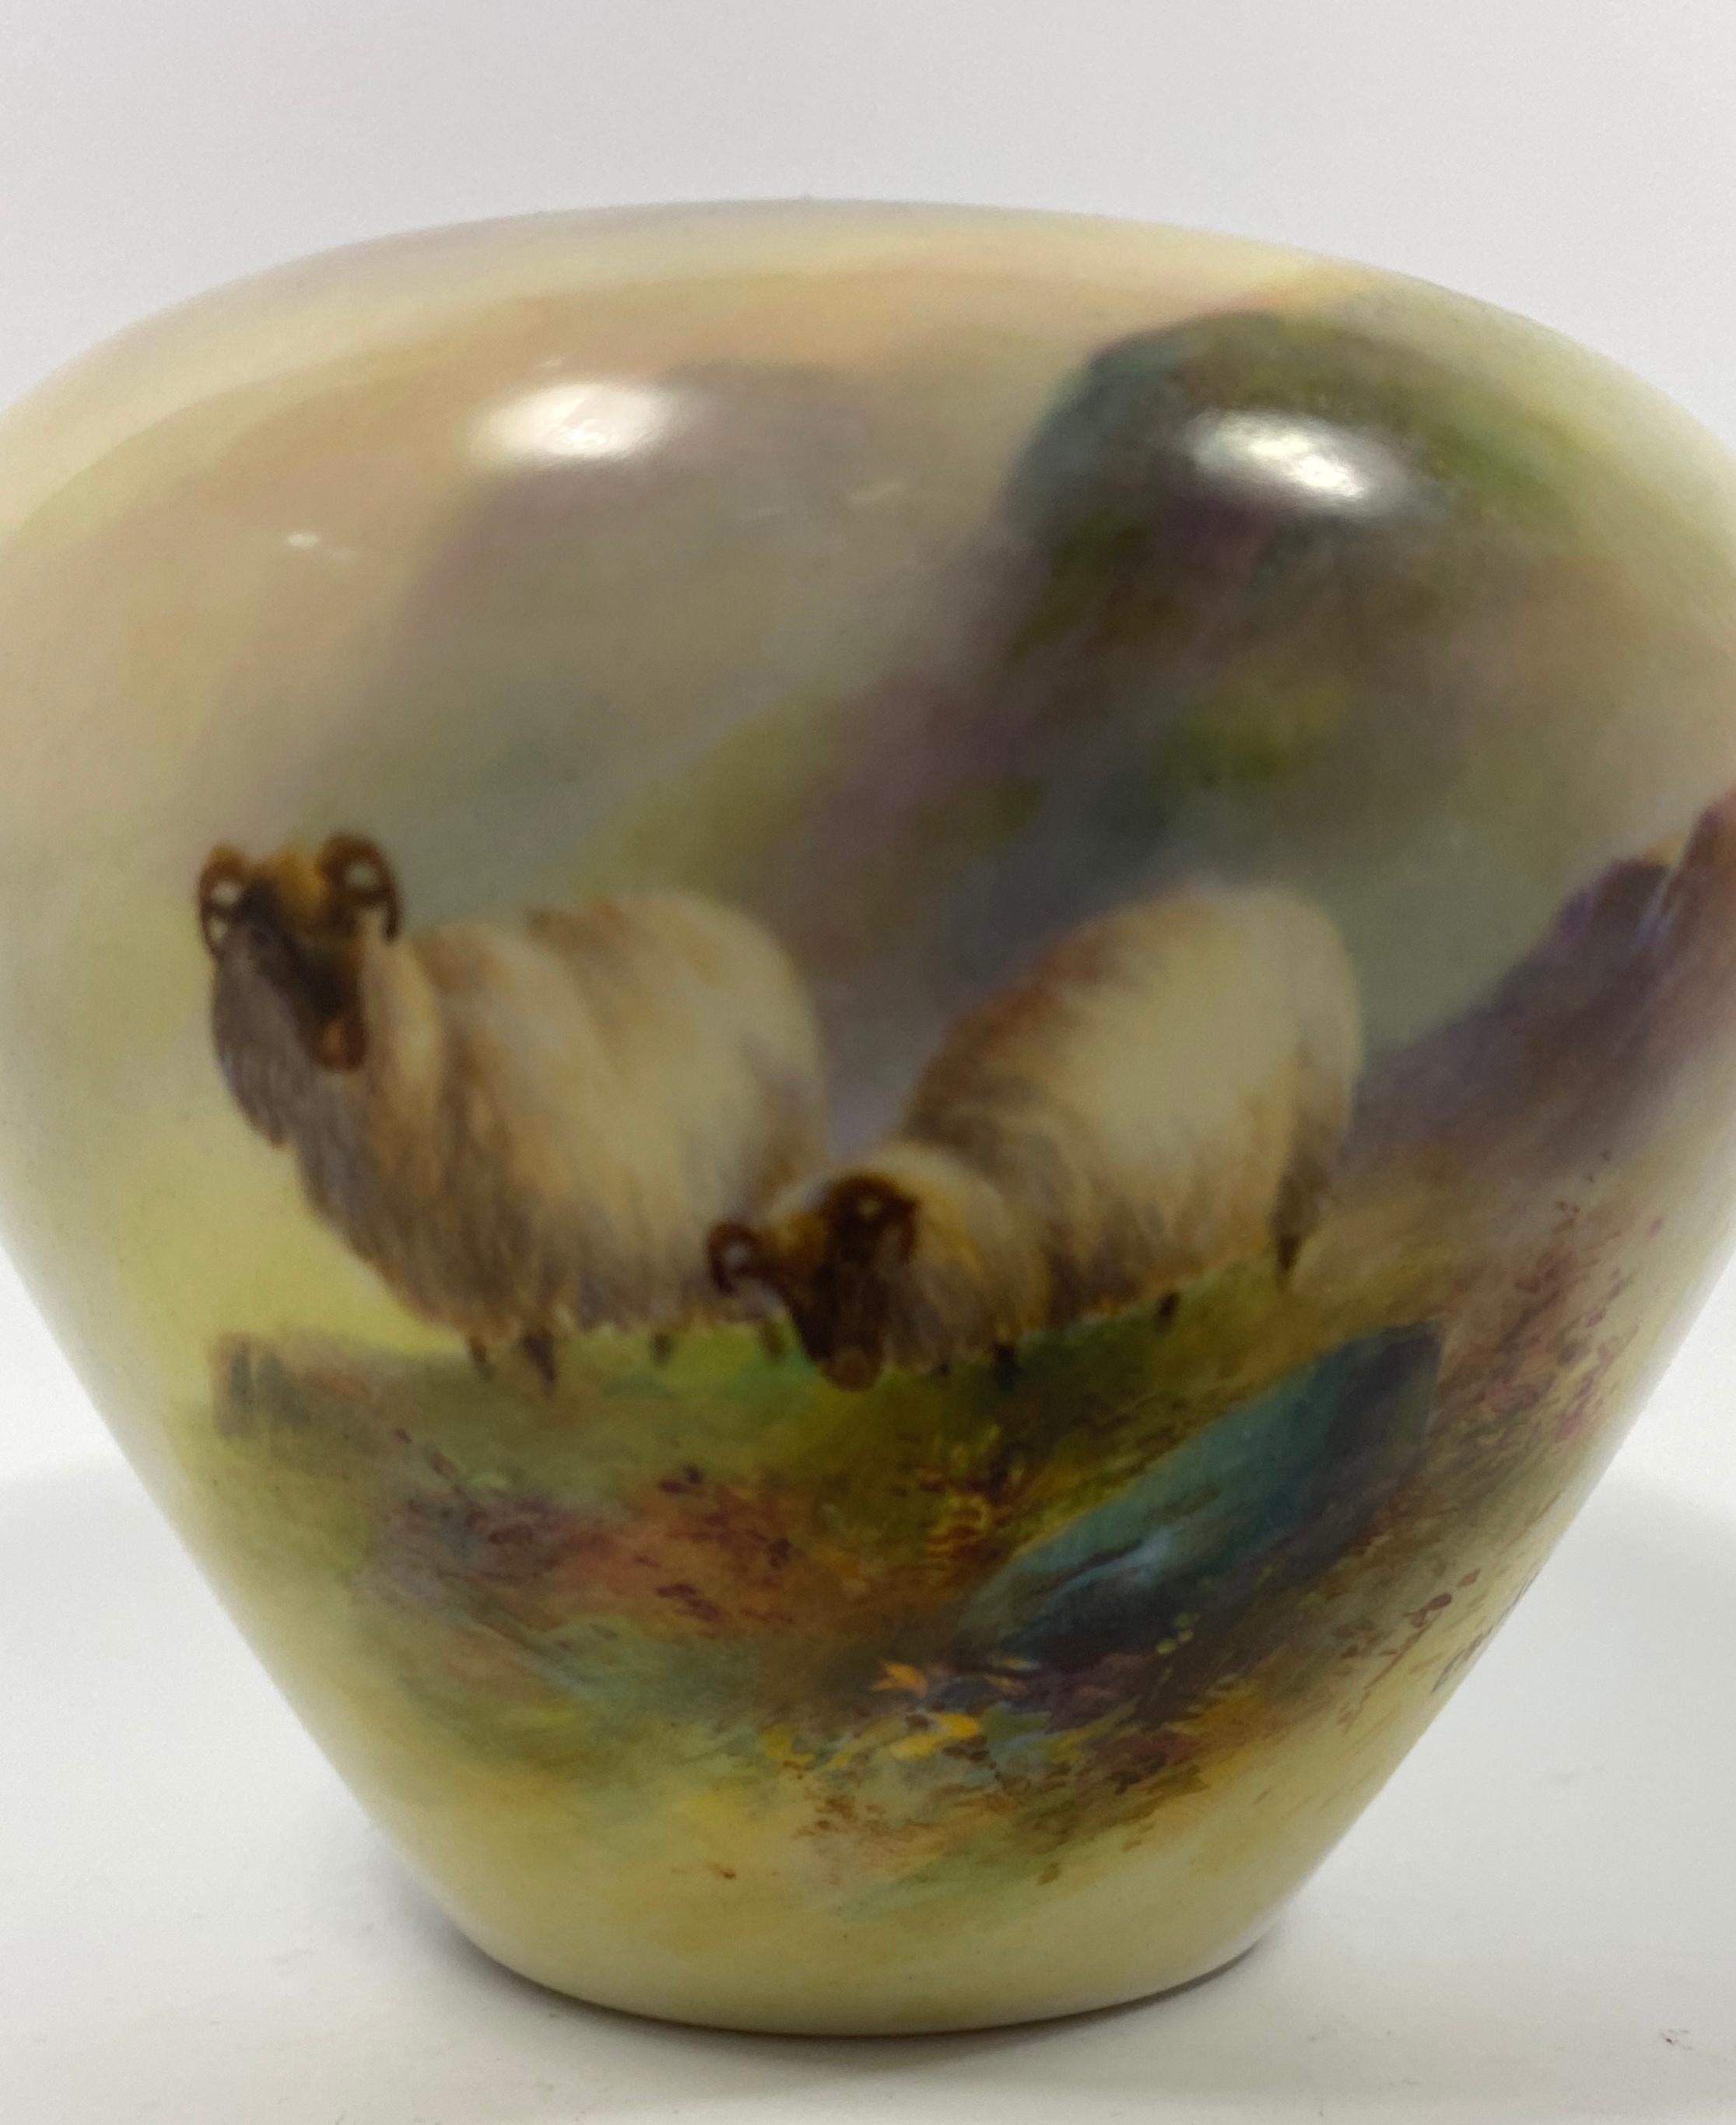 Royal Worcester porcelain vase, dated 1911. Beautifully hand painted by Ernest Barker, with two sheep, in a Highland setting.
Signed E. Barker.
Printed green factory marks and model number to the base.
Measures: Height - 6.5 cm,2 1/2”.
Diameter